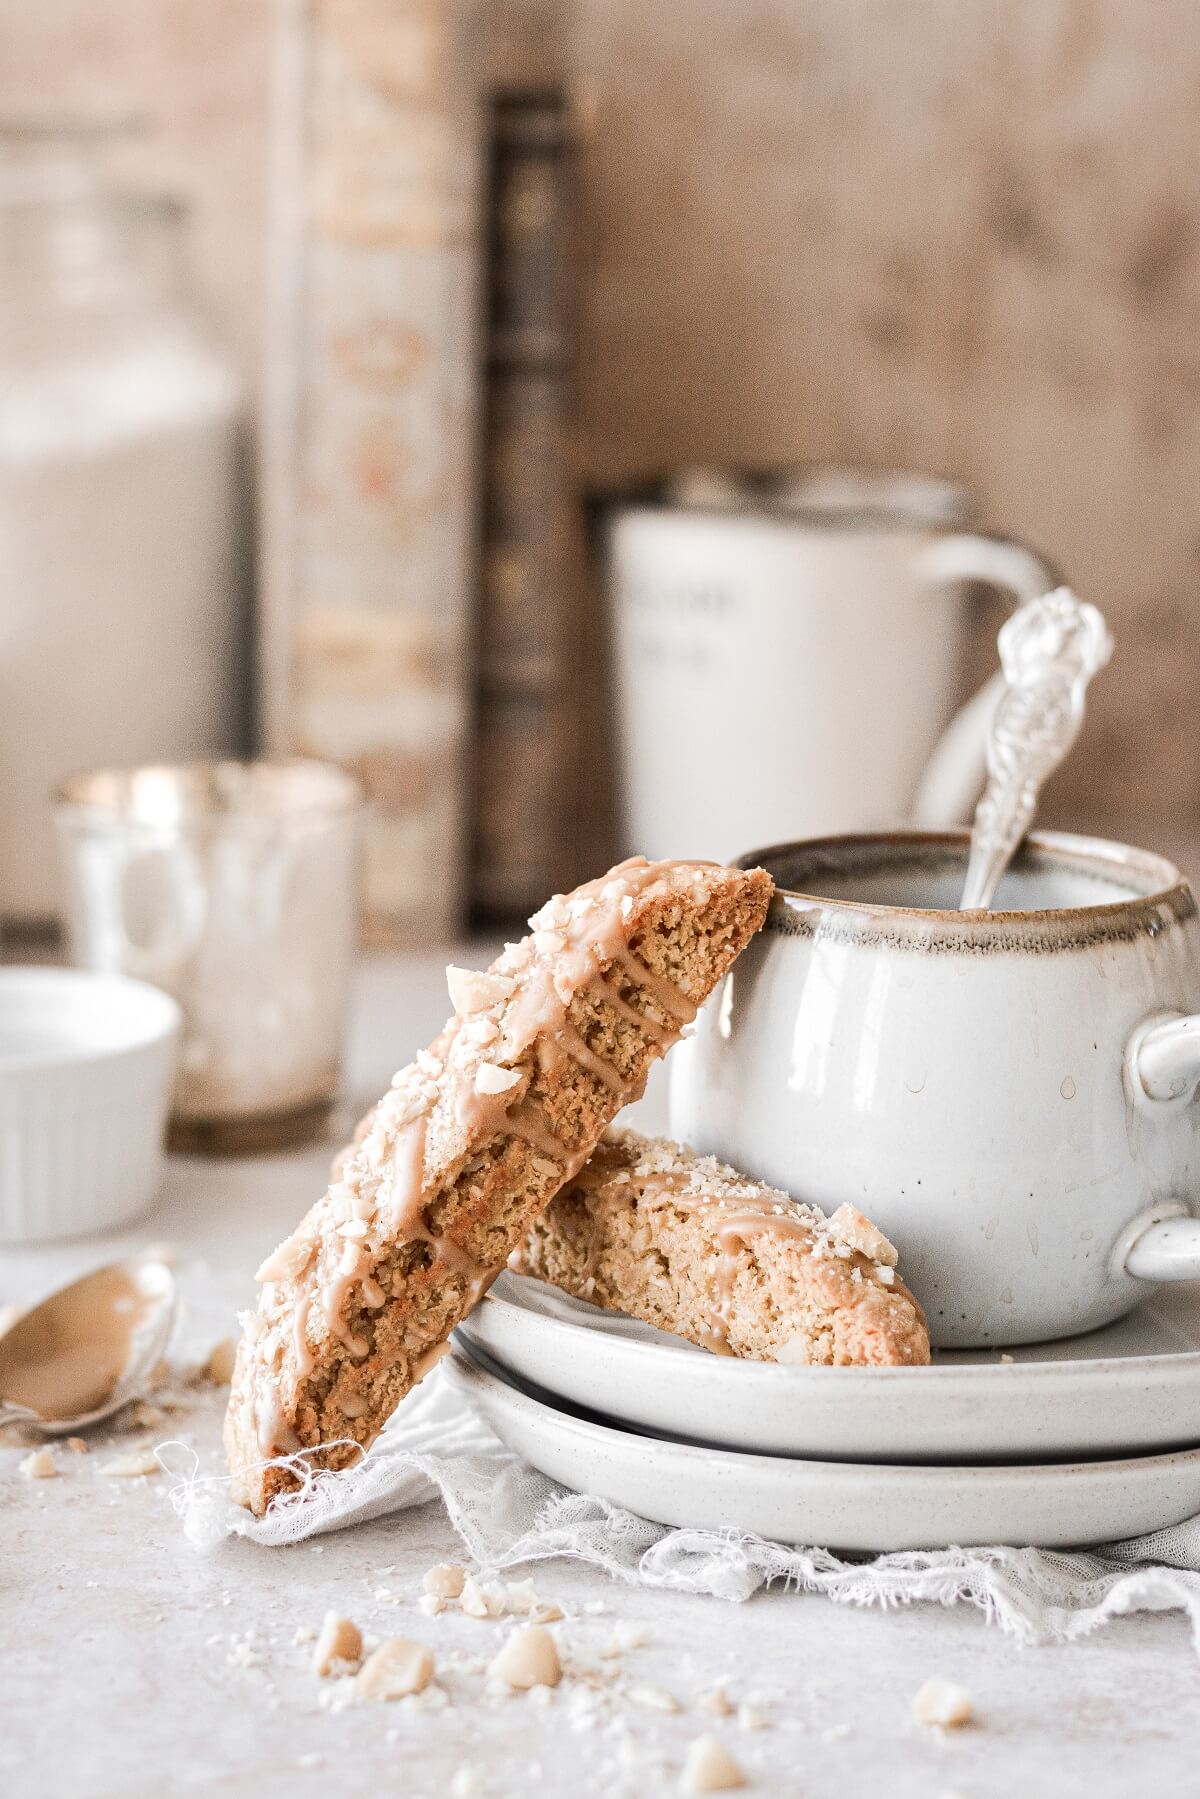 Maple biscotti with macadamia nuts resting against a cup of coffee.